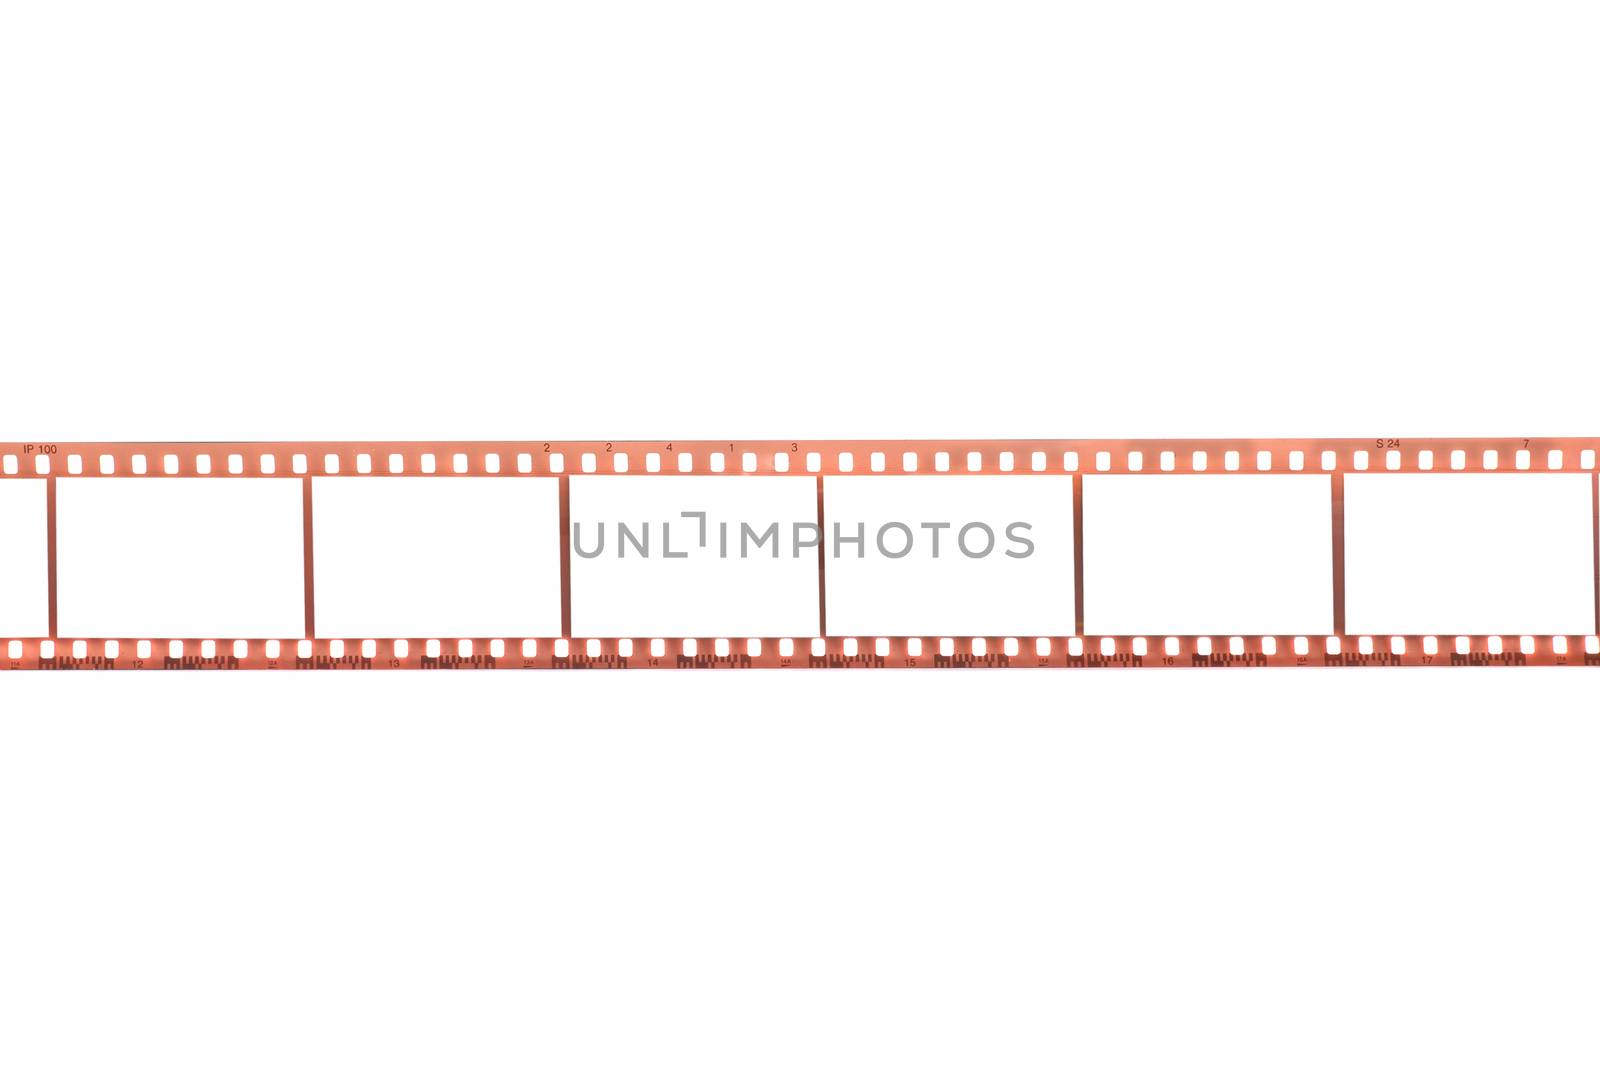 Photographic film with empty frames on white background